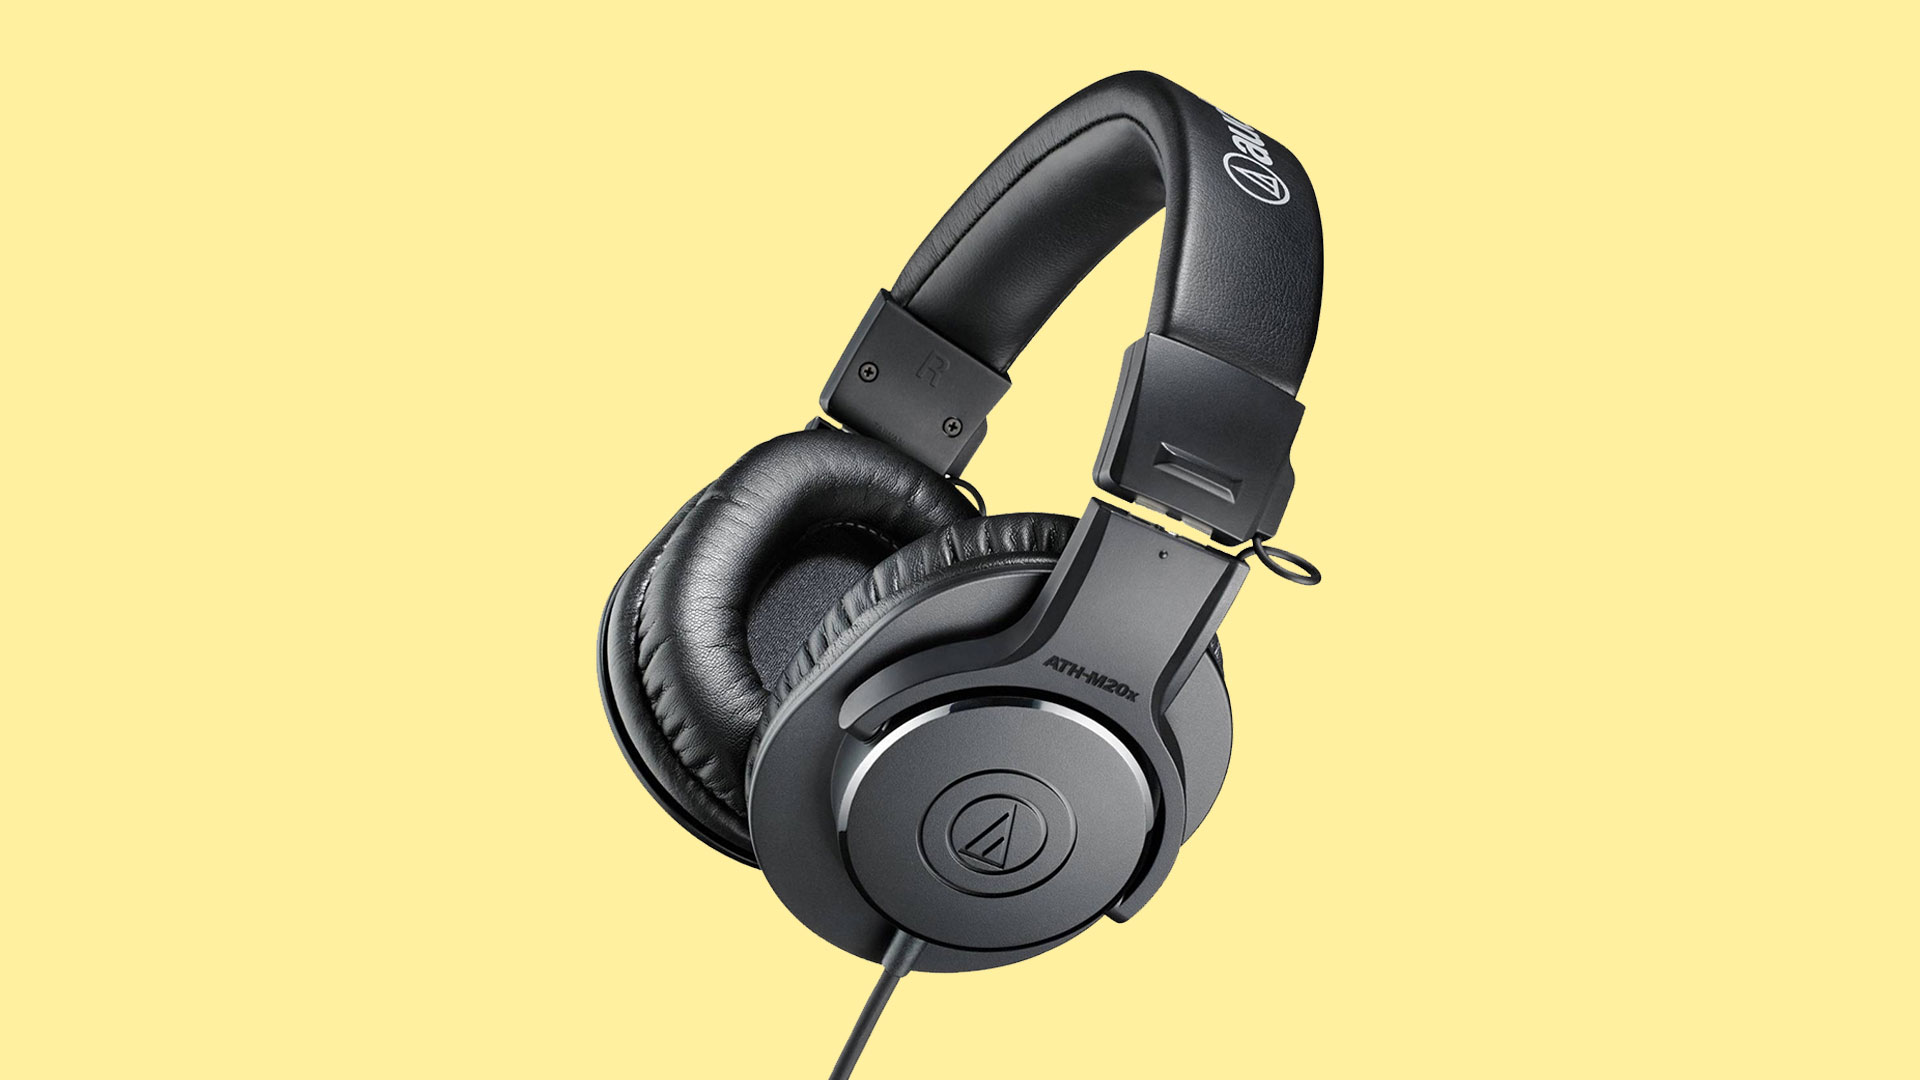 The Audio Technica ATH-m20x is a good pair of headphones for podcasters who are on a tight budget.